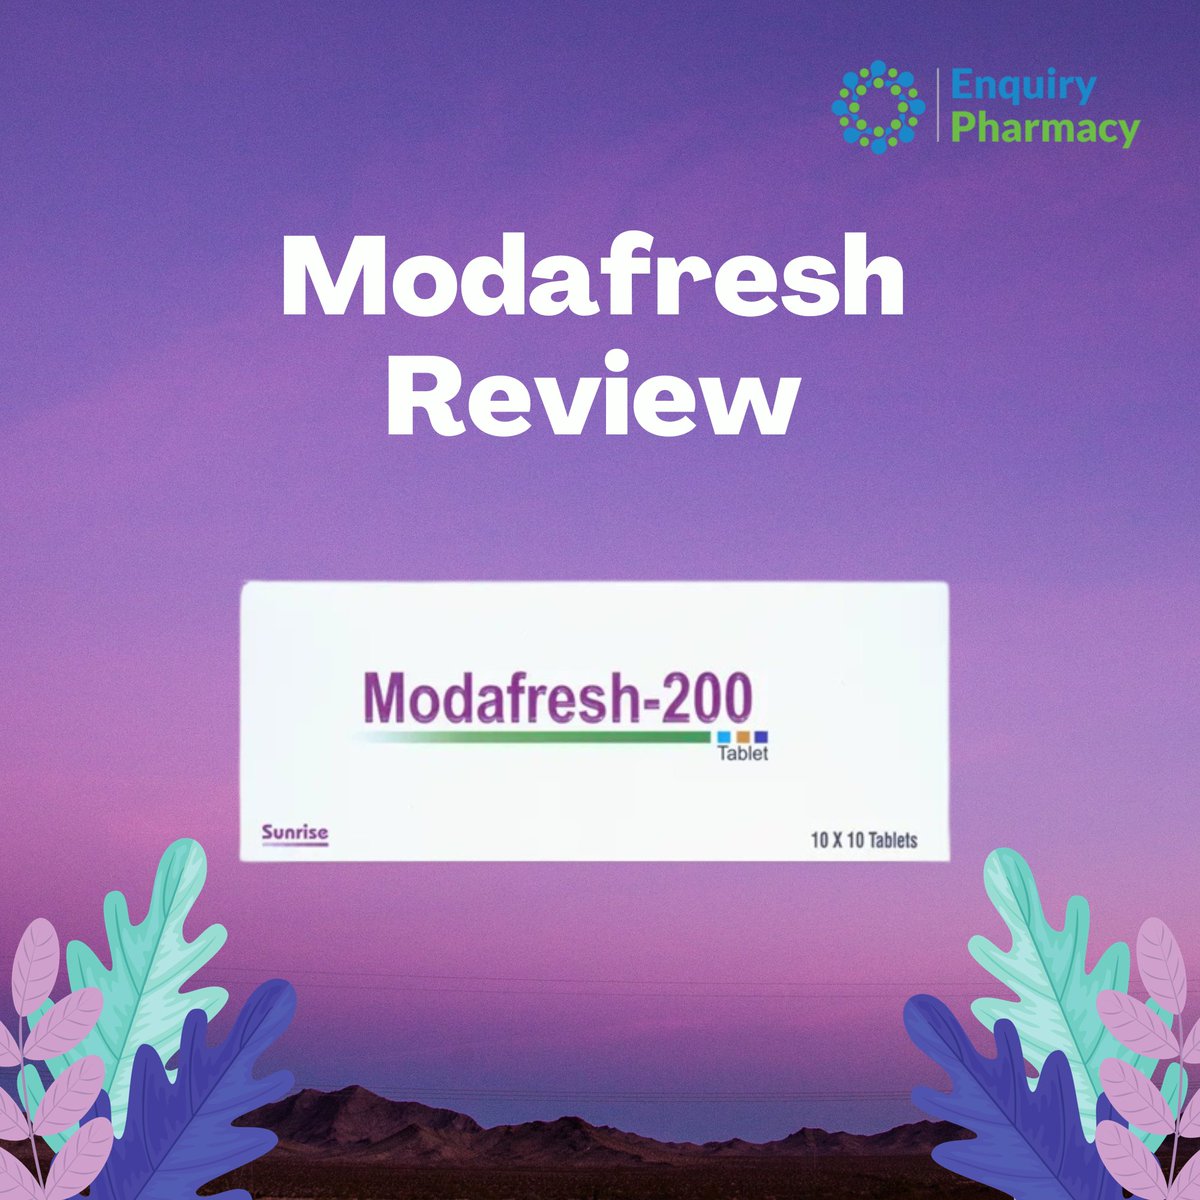 Modafresh 200mg Review: Learn more effortlessly! - t.ly/0R6Y1

#FocusBooster #nootropics